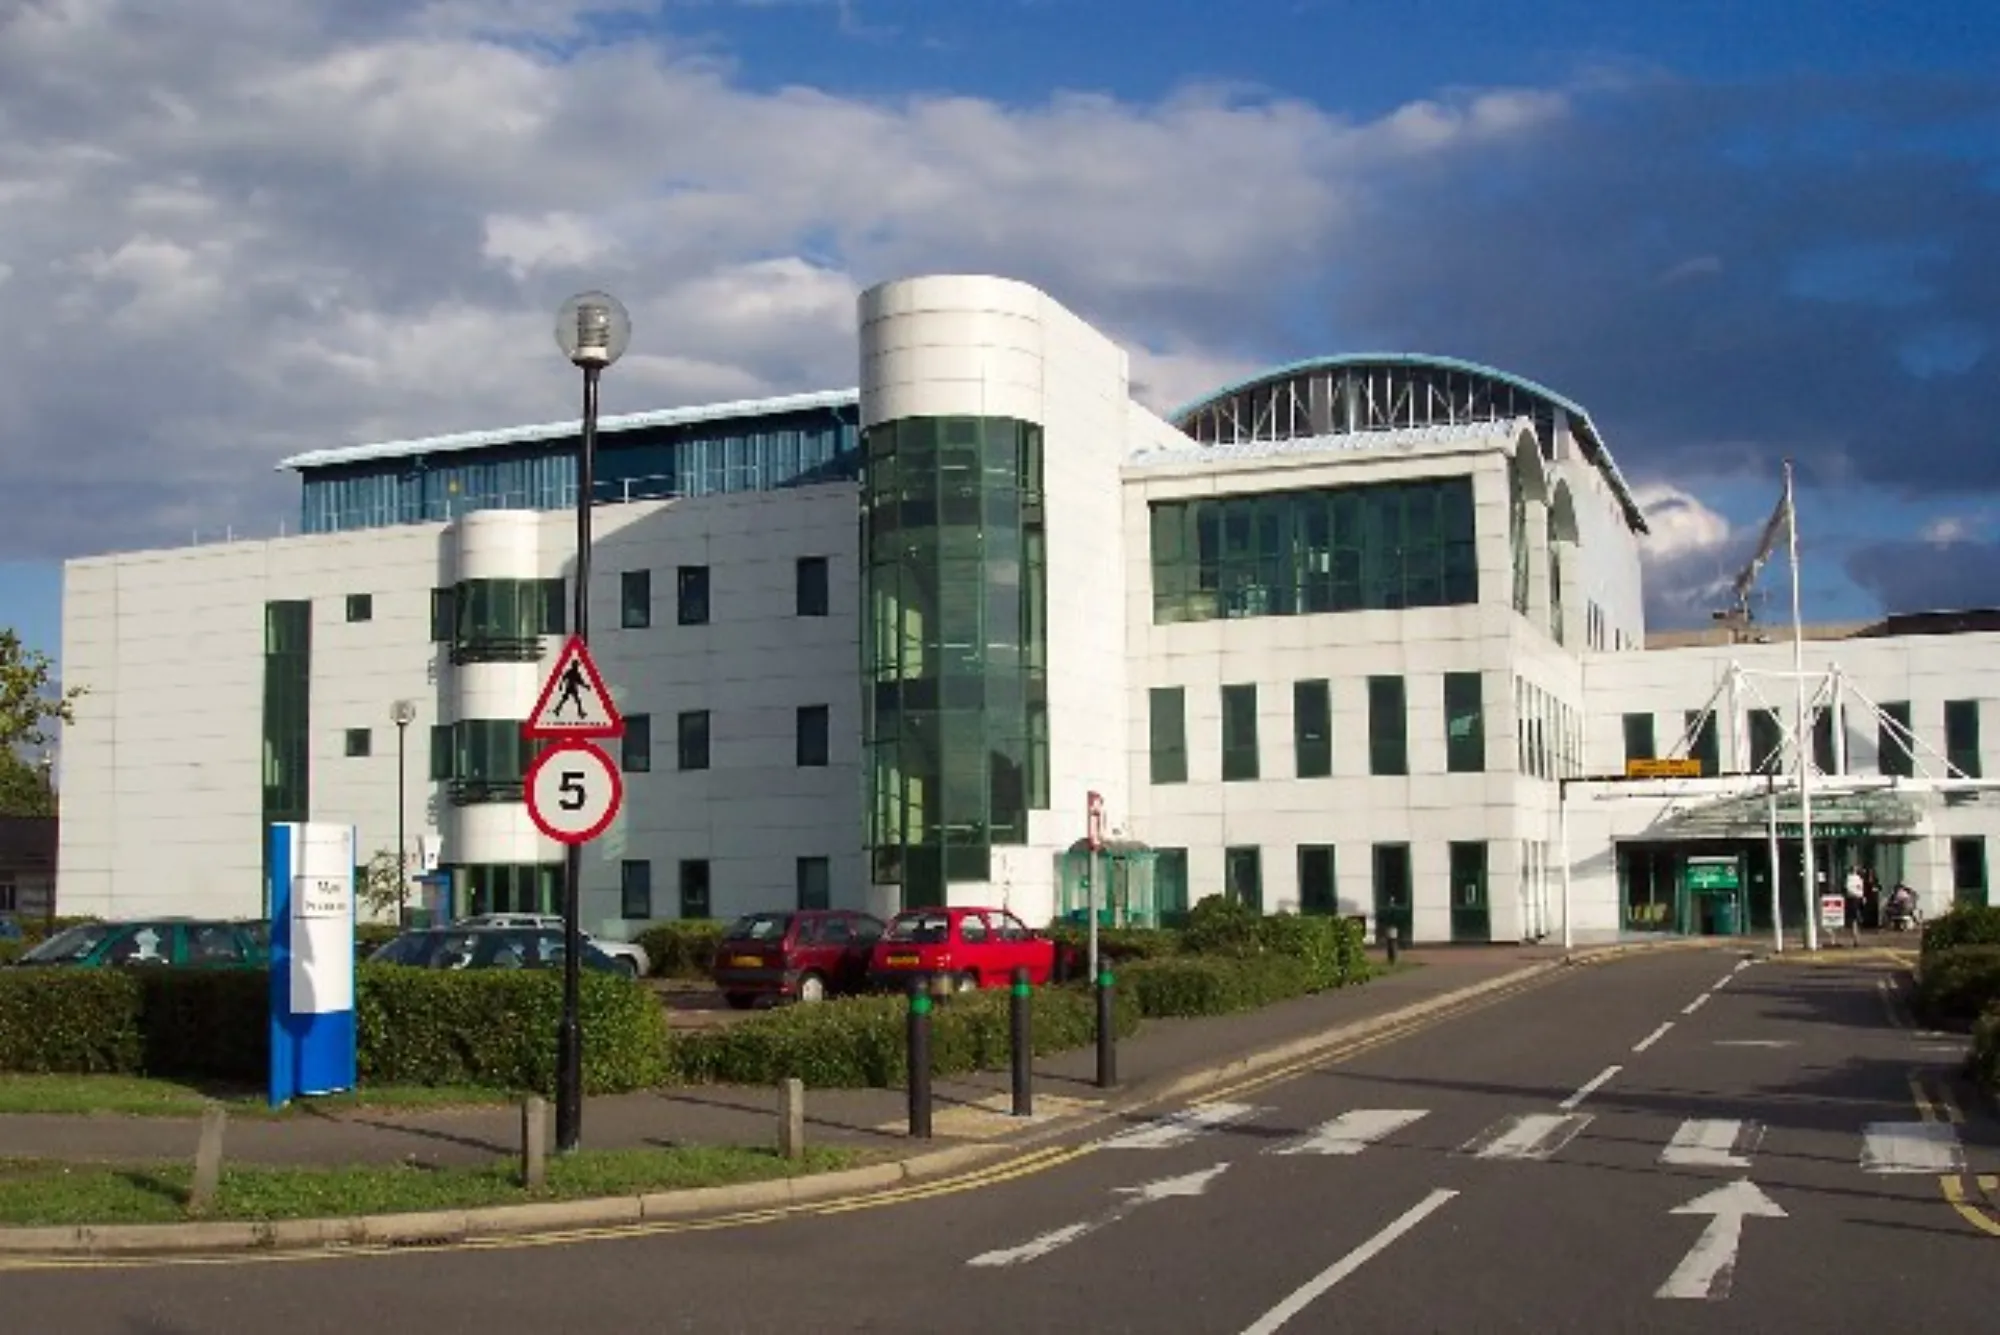 Ashford Hospital: Excellence in Healthcare